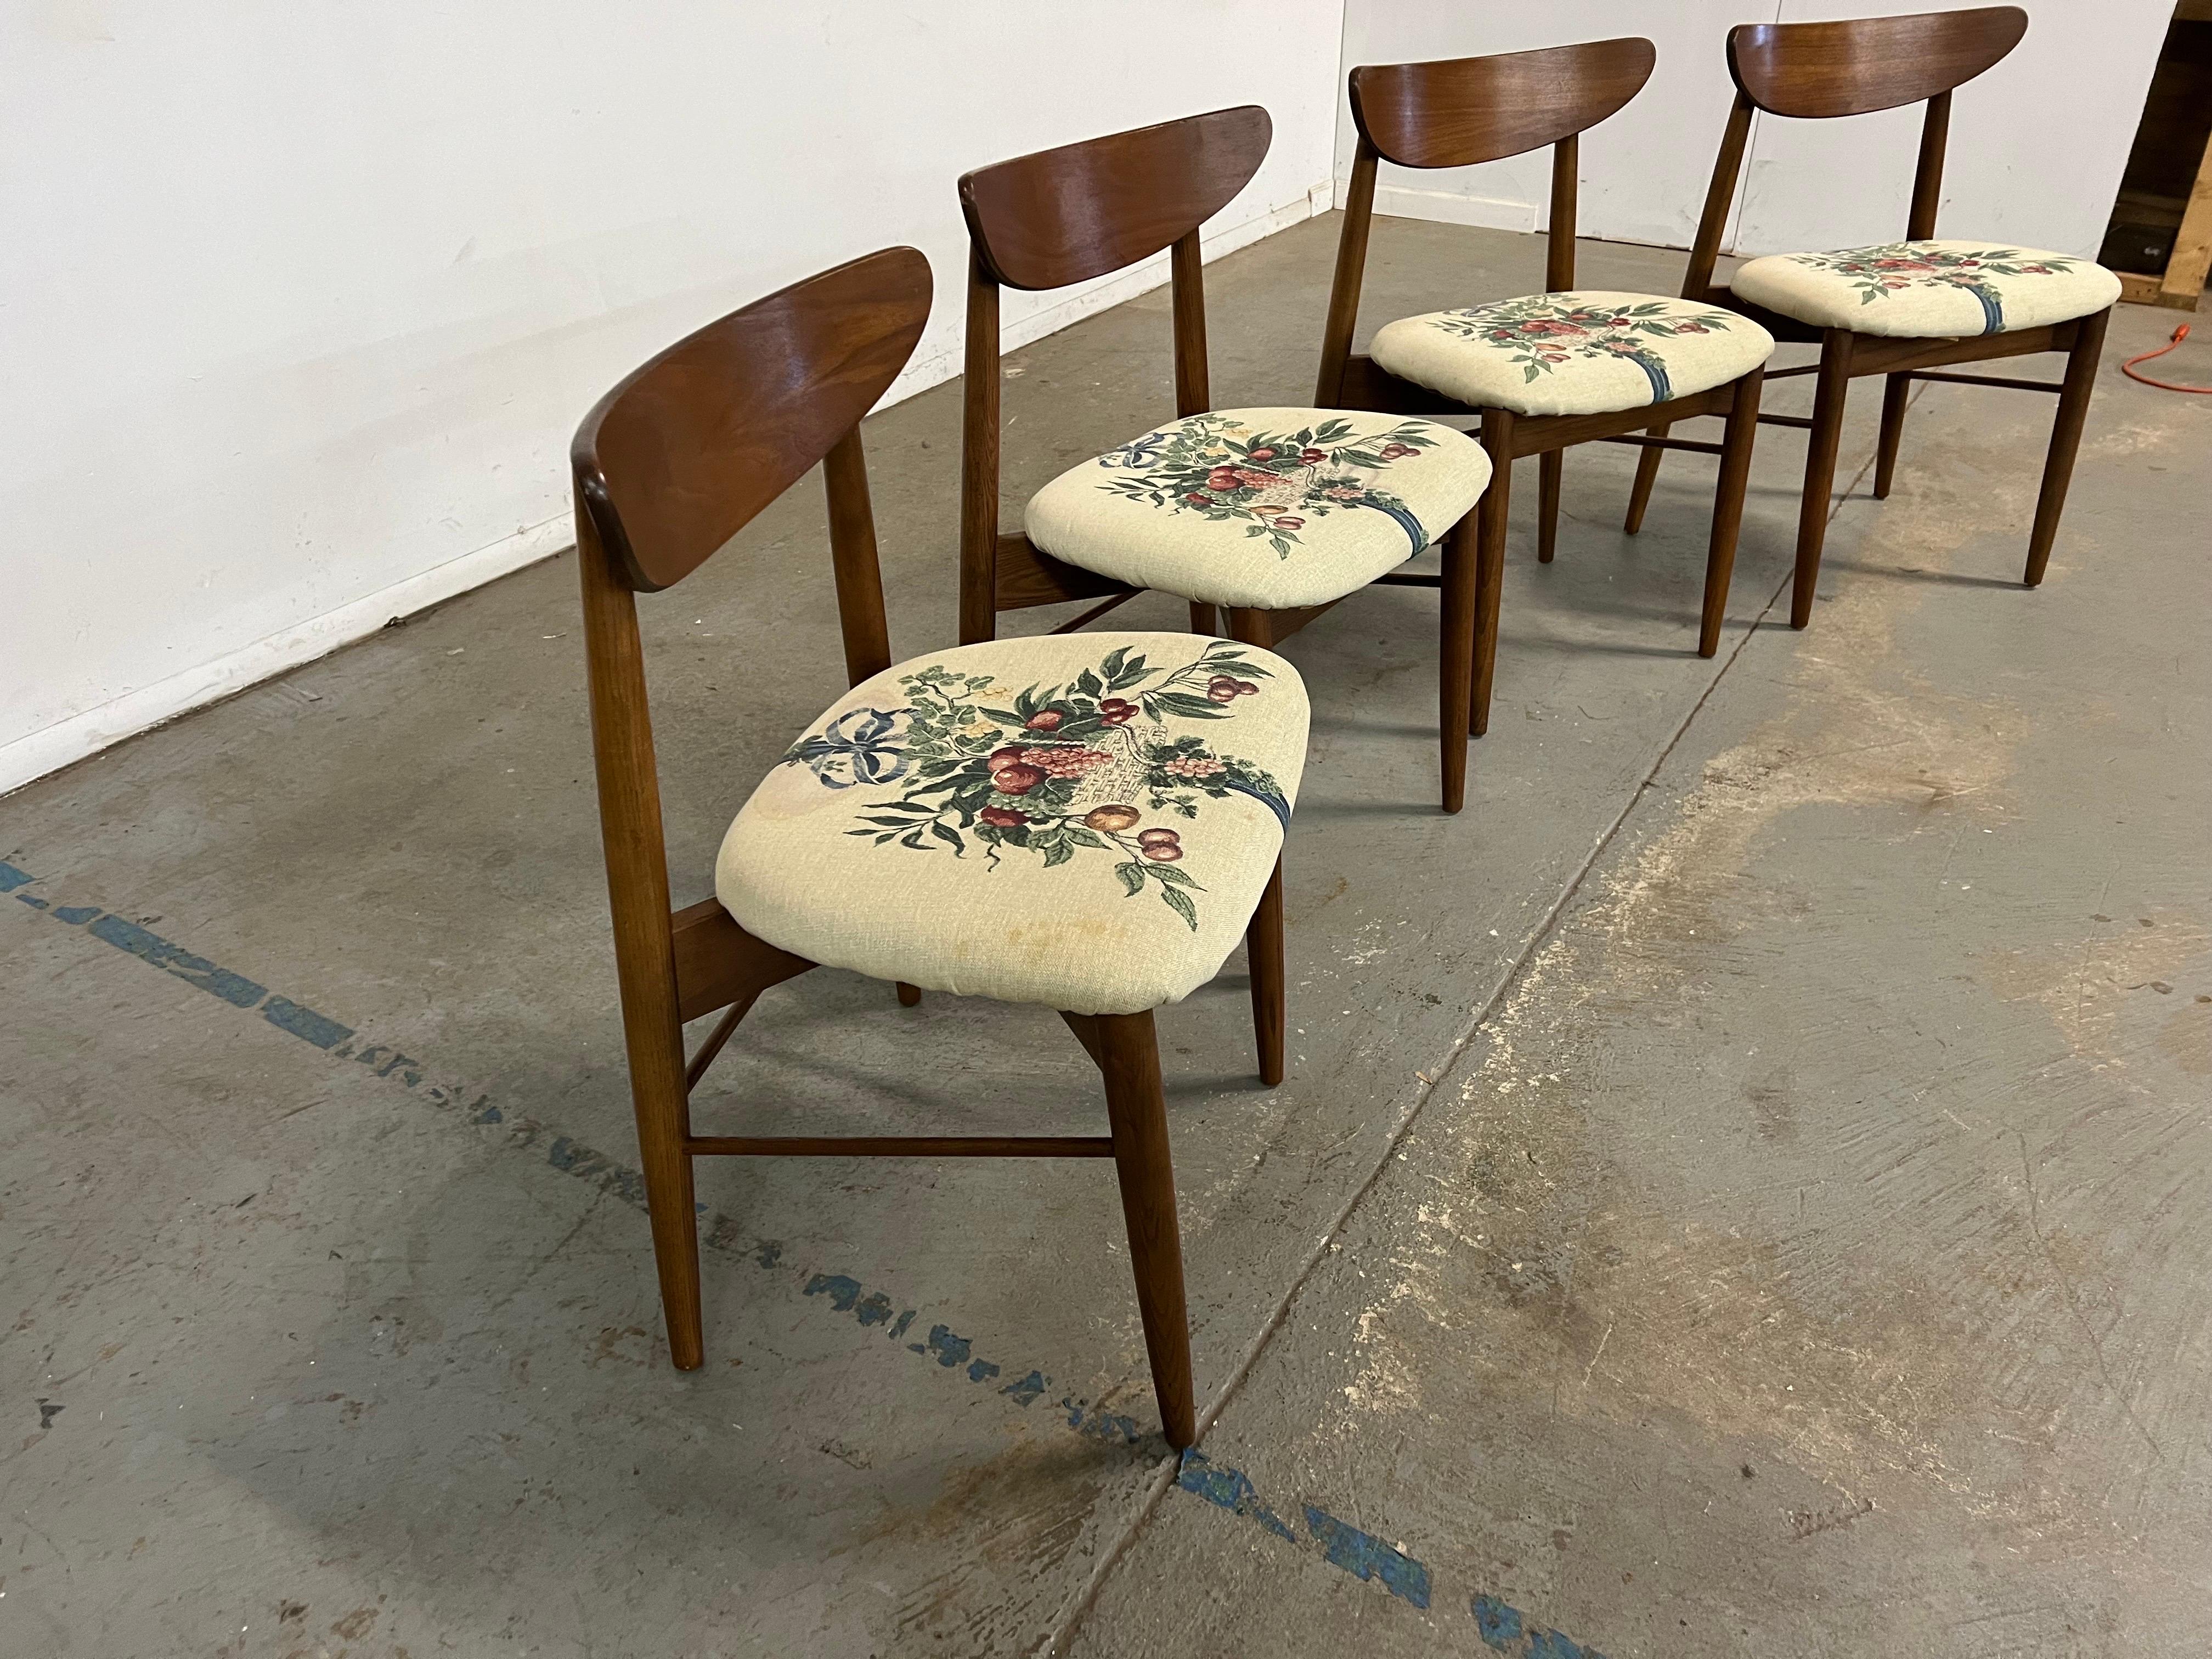 Set of 4 Mid-Century Modern H Paul Browning shell back walnut dining chairs

Offered is a vintage set of 4 Mid-Century Modern dining chairs attributed to H Paul Browning. These chairs have sleek lines and a lot of potential. Featuring curved shell